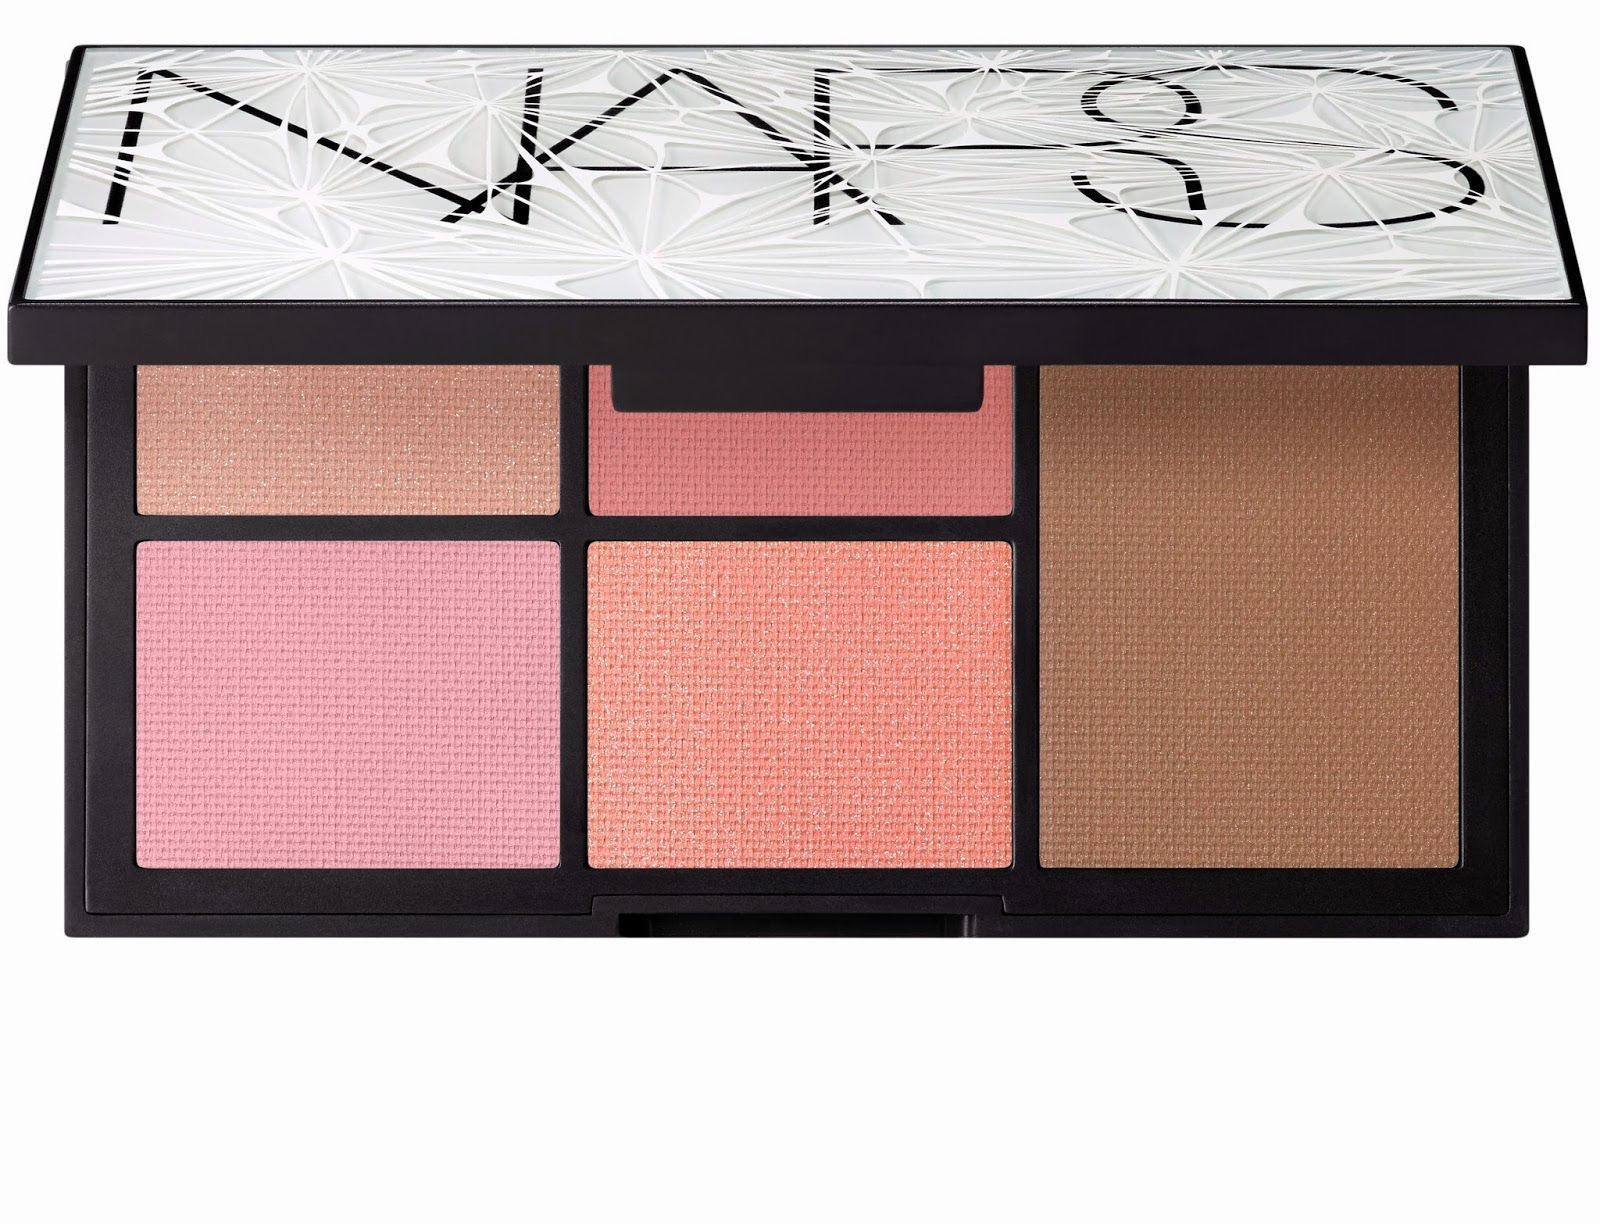 NARS, Holiday 2014 Gifting Collection Laced with Ege